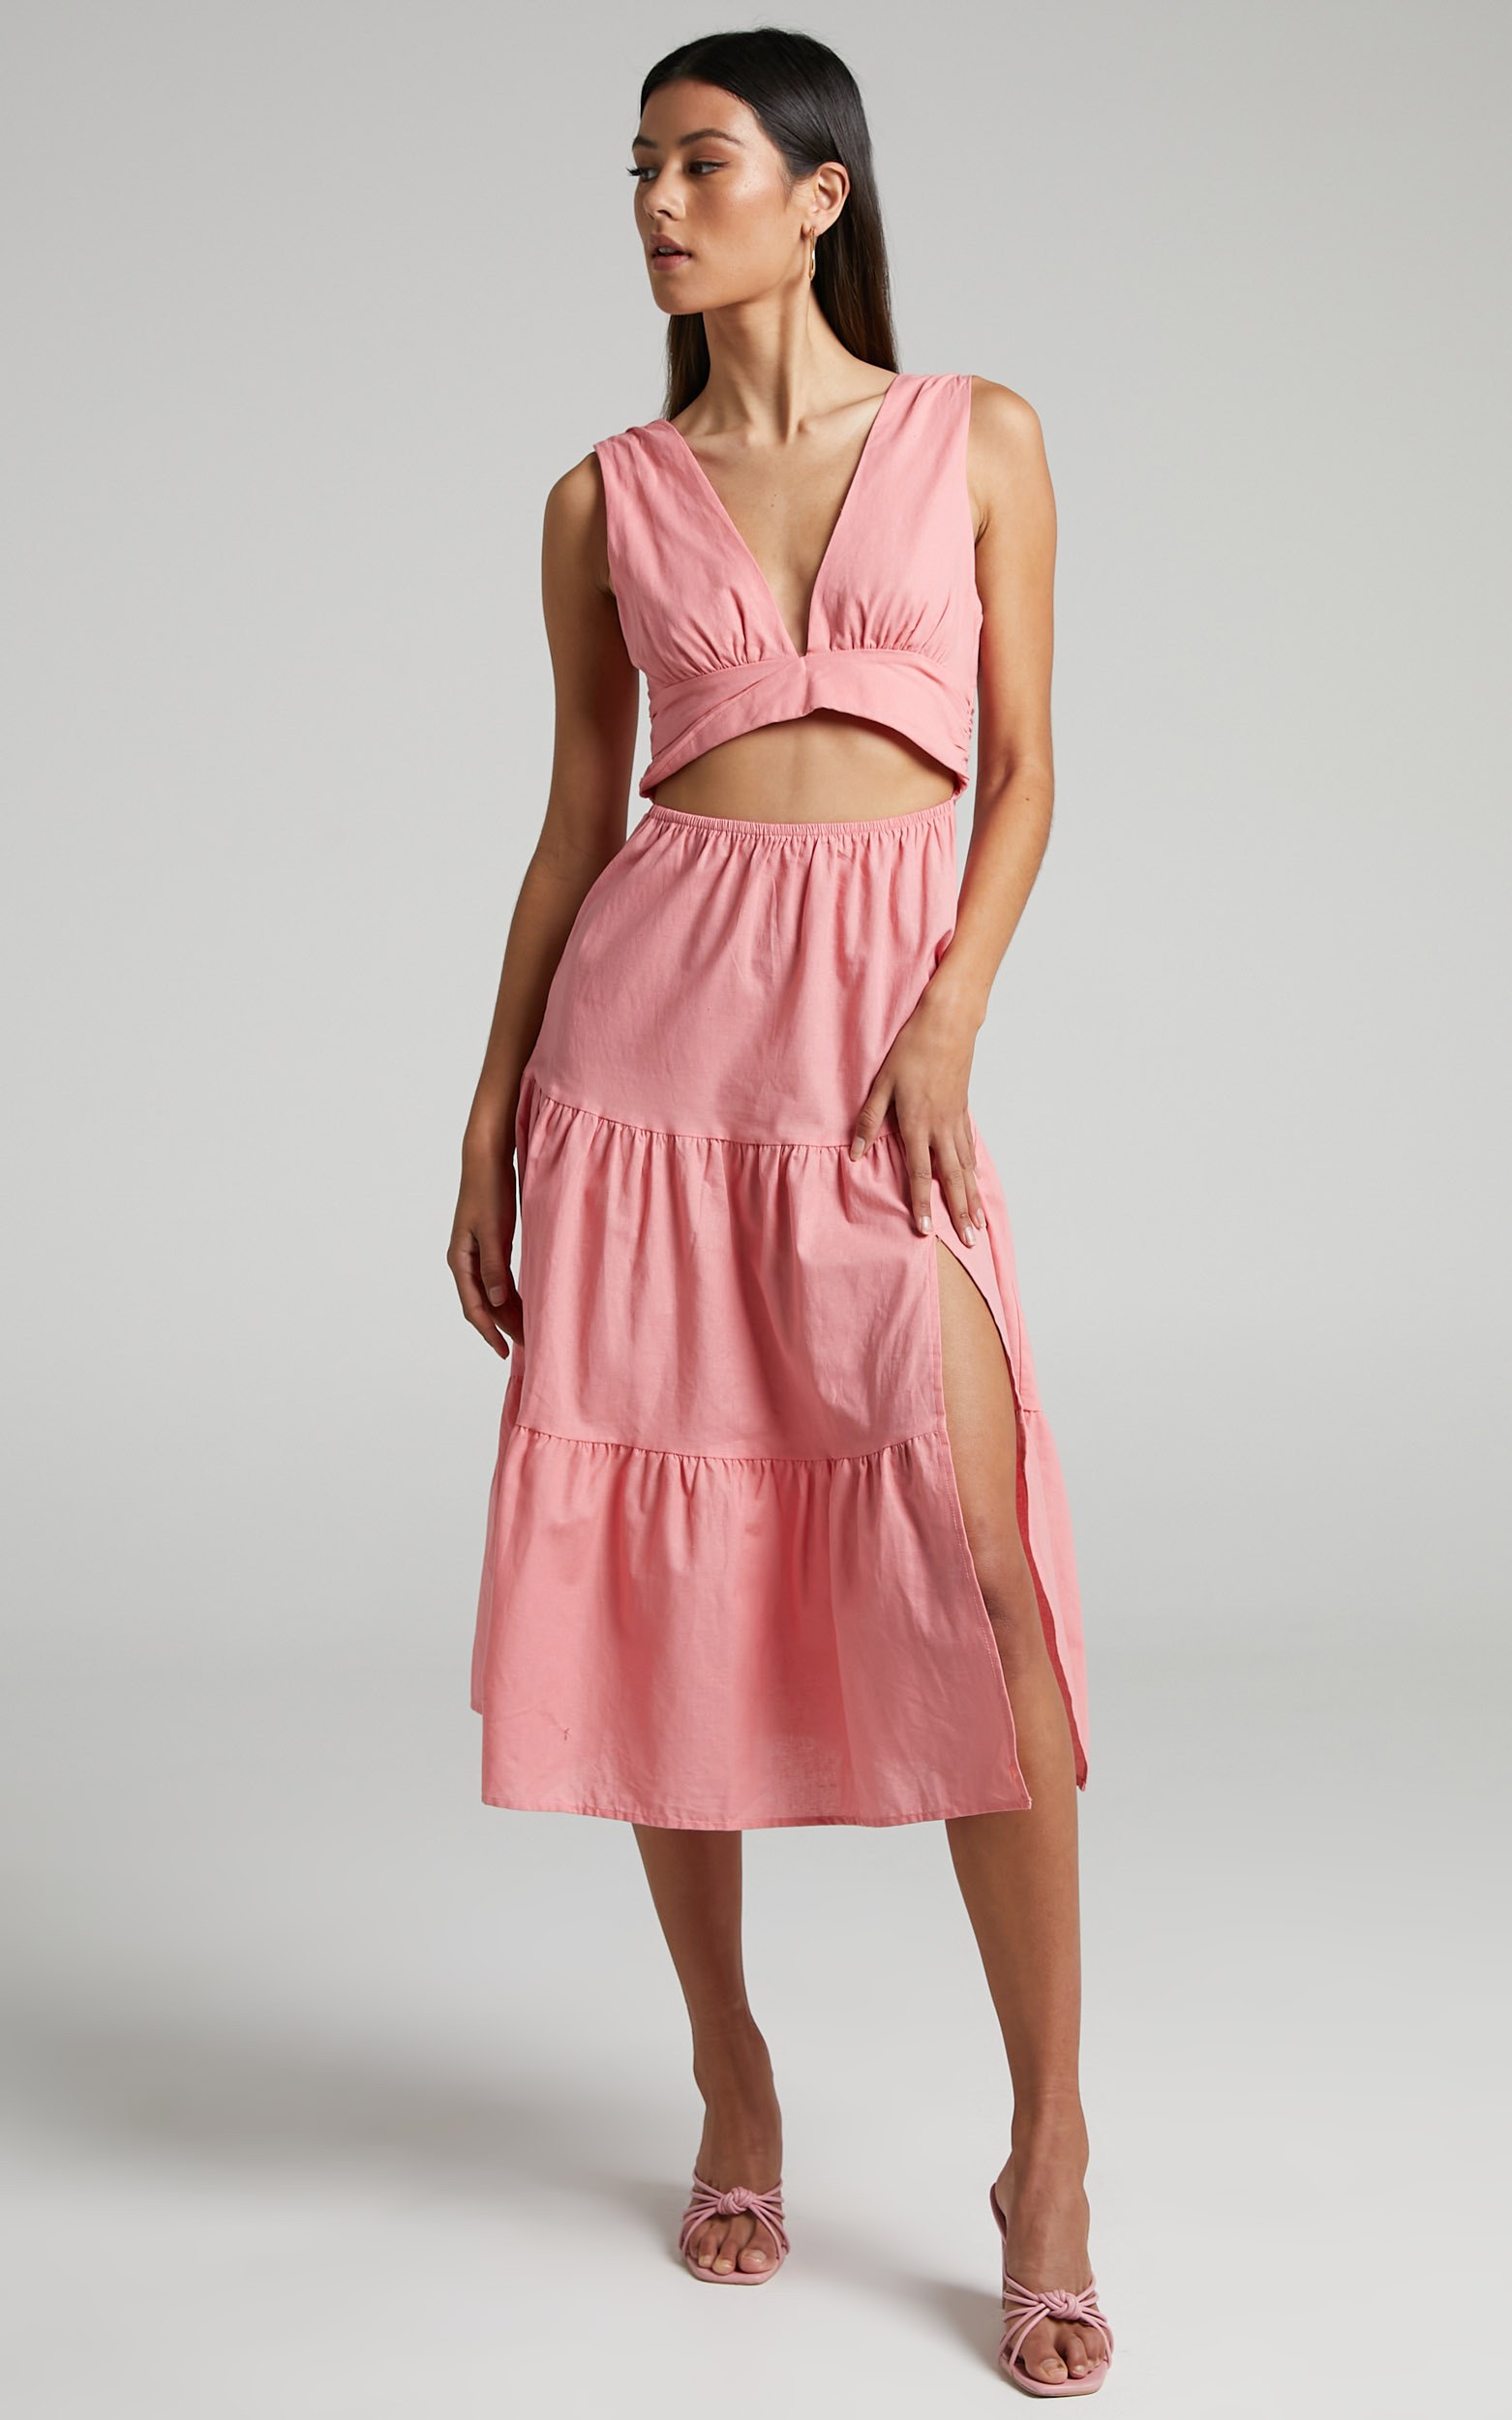 Spencer V Neck Cut Out Tiered Midi Dress in Dusty Pink - 04, PNK2, hi-res image number null